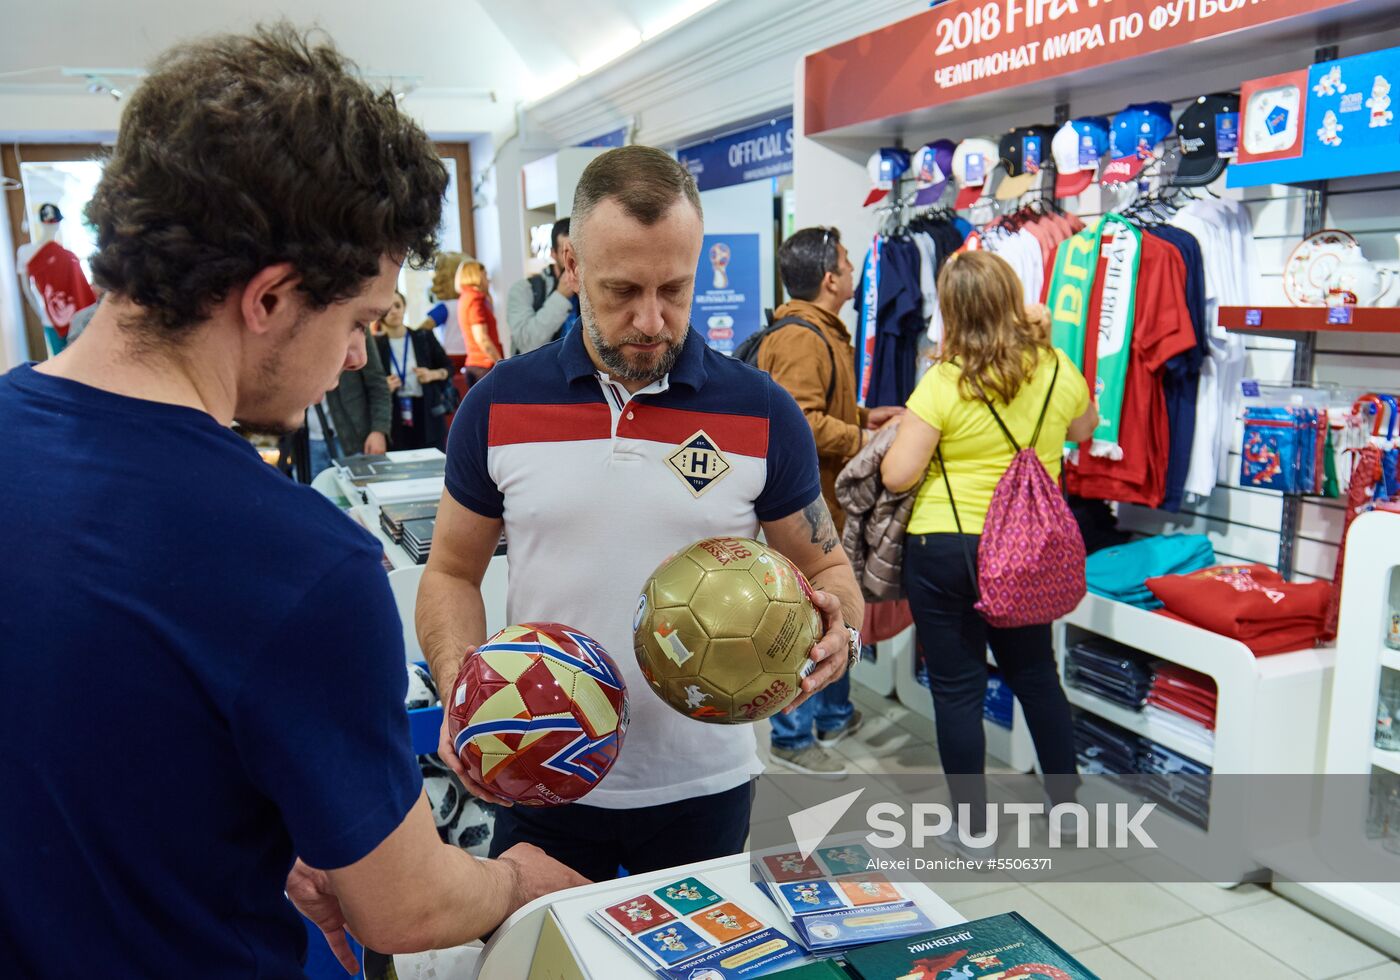 2018 FIFA World Cup souvenir store in St. Petersburg